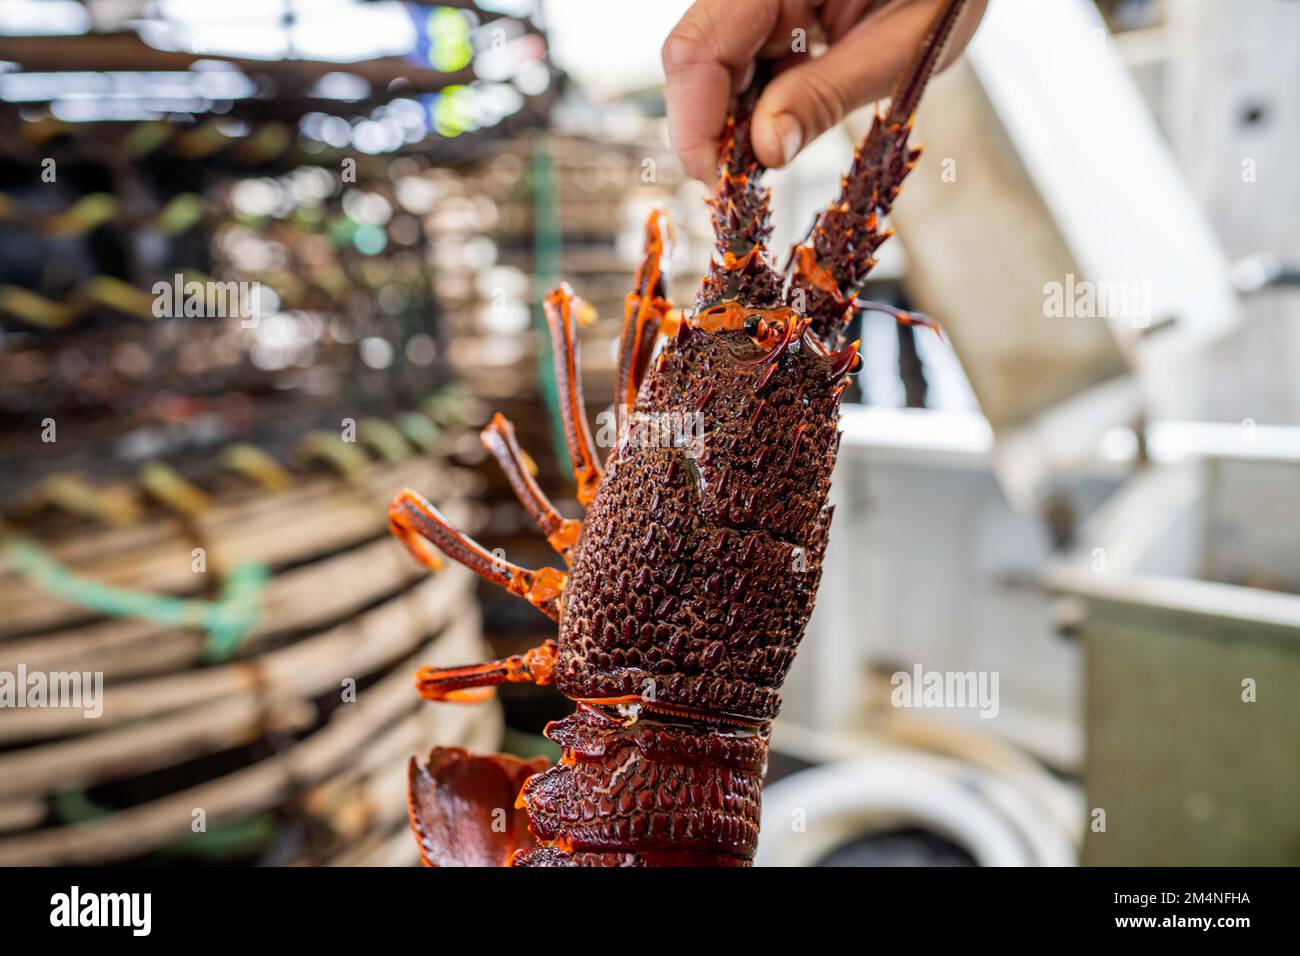 Live east coast rock lobster fishing in australia. Crayfish on a boat caught in lobster pots in australia Stock Photo